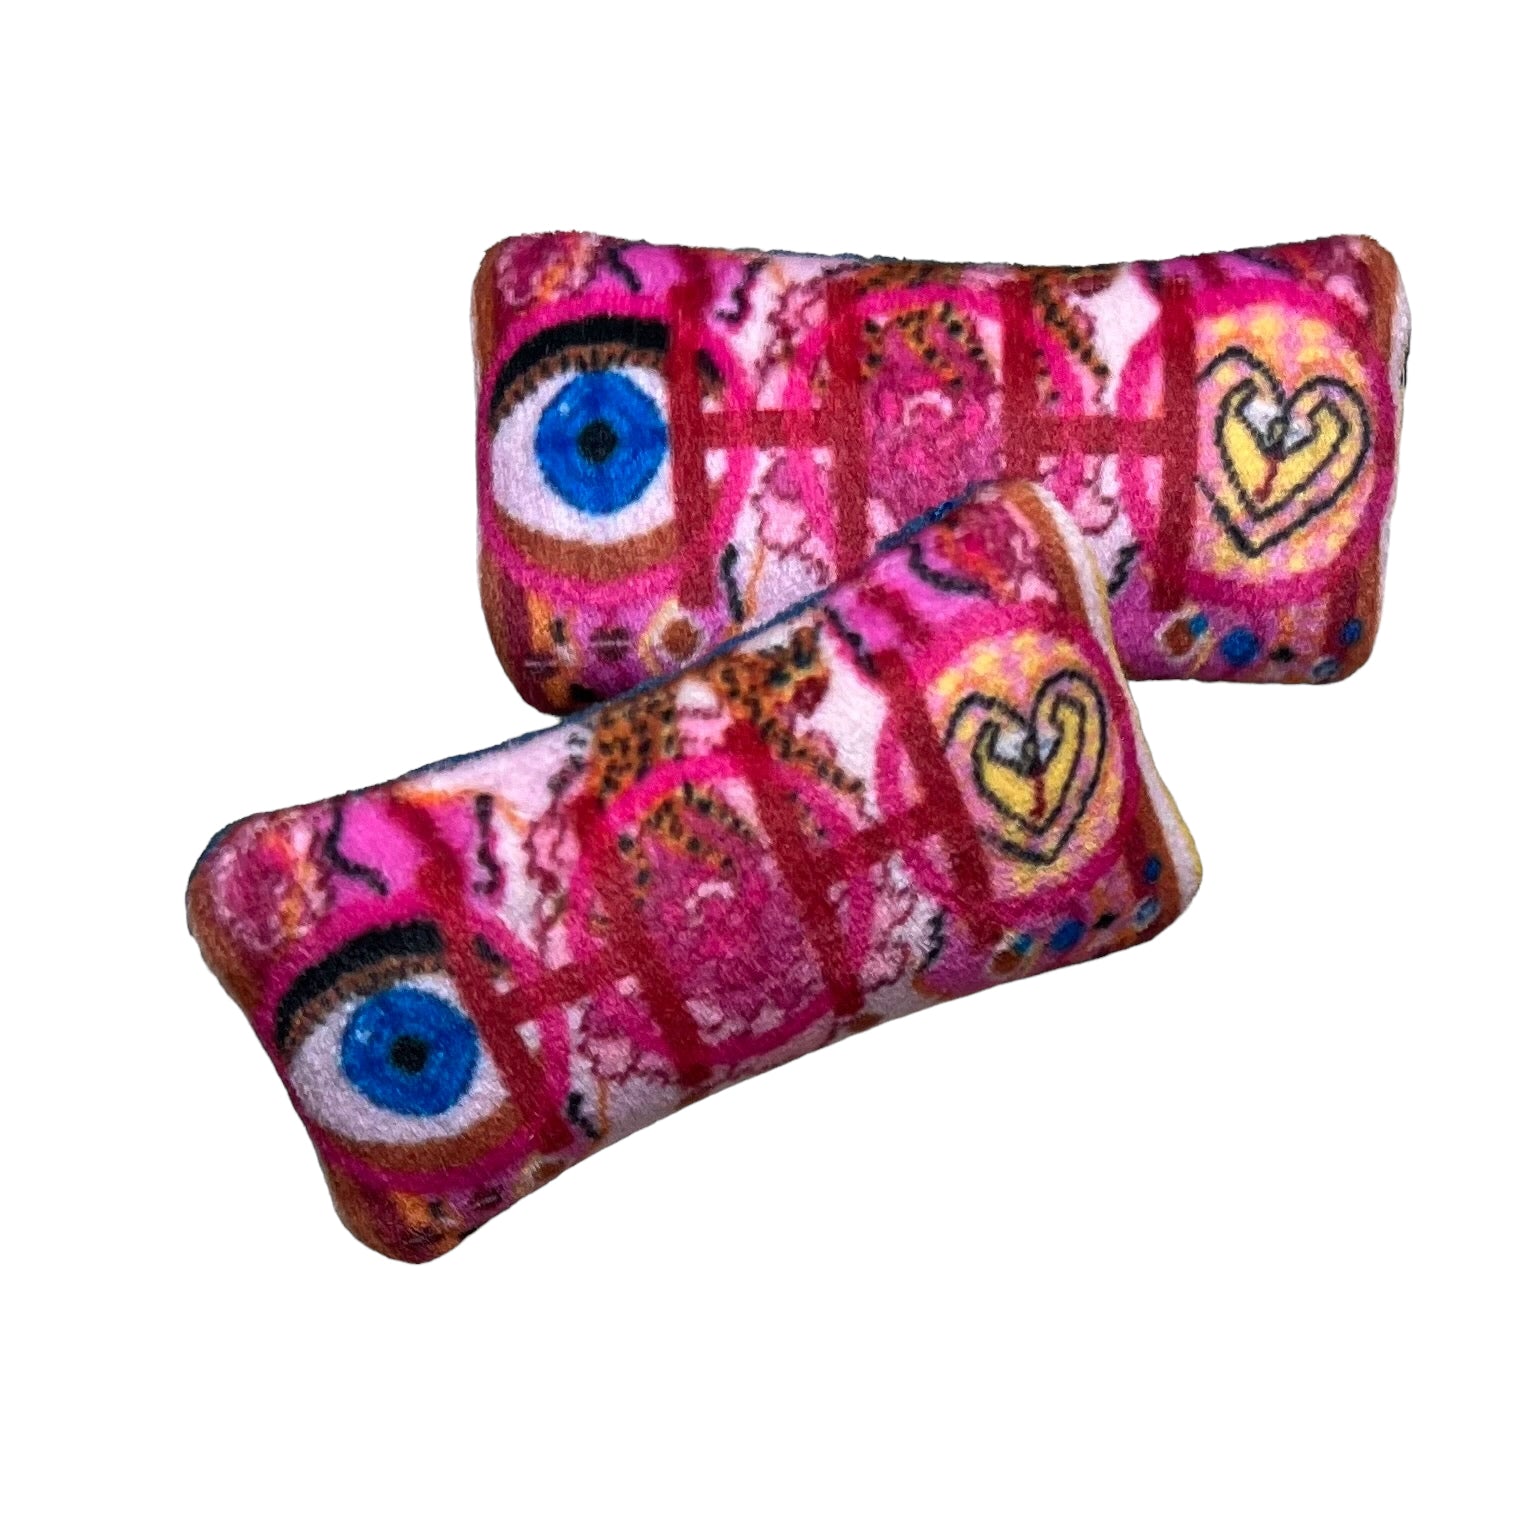 organic French lavender pink sachet with blue eye, cheetah, lips, snakes